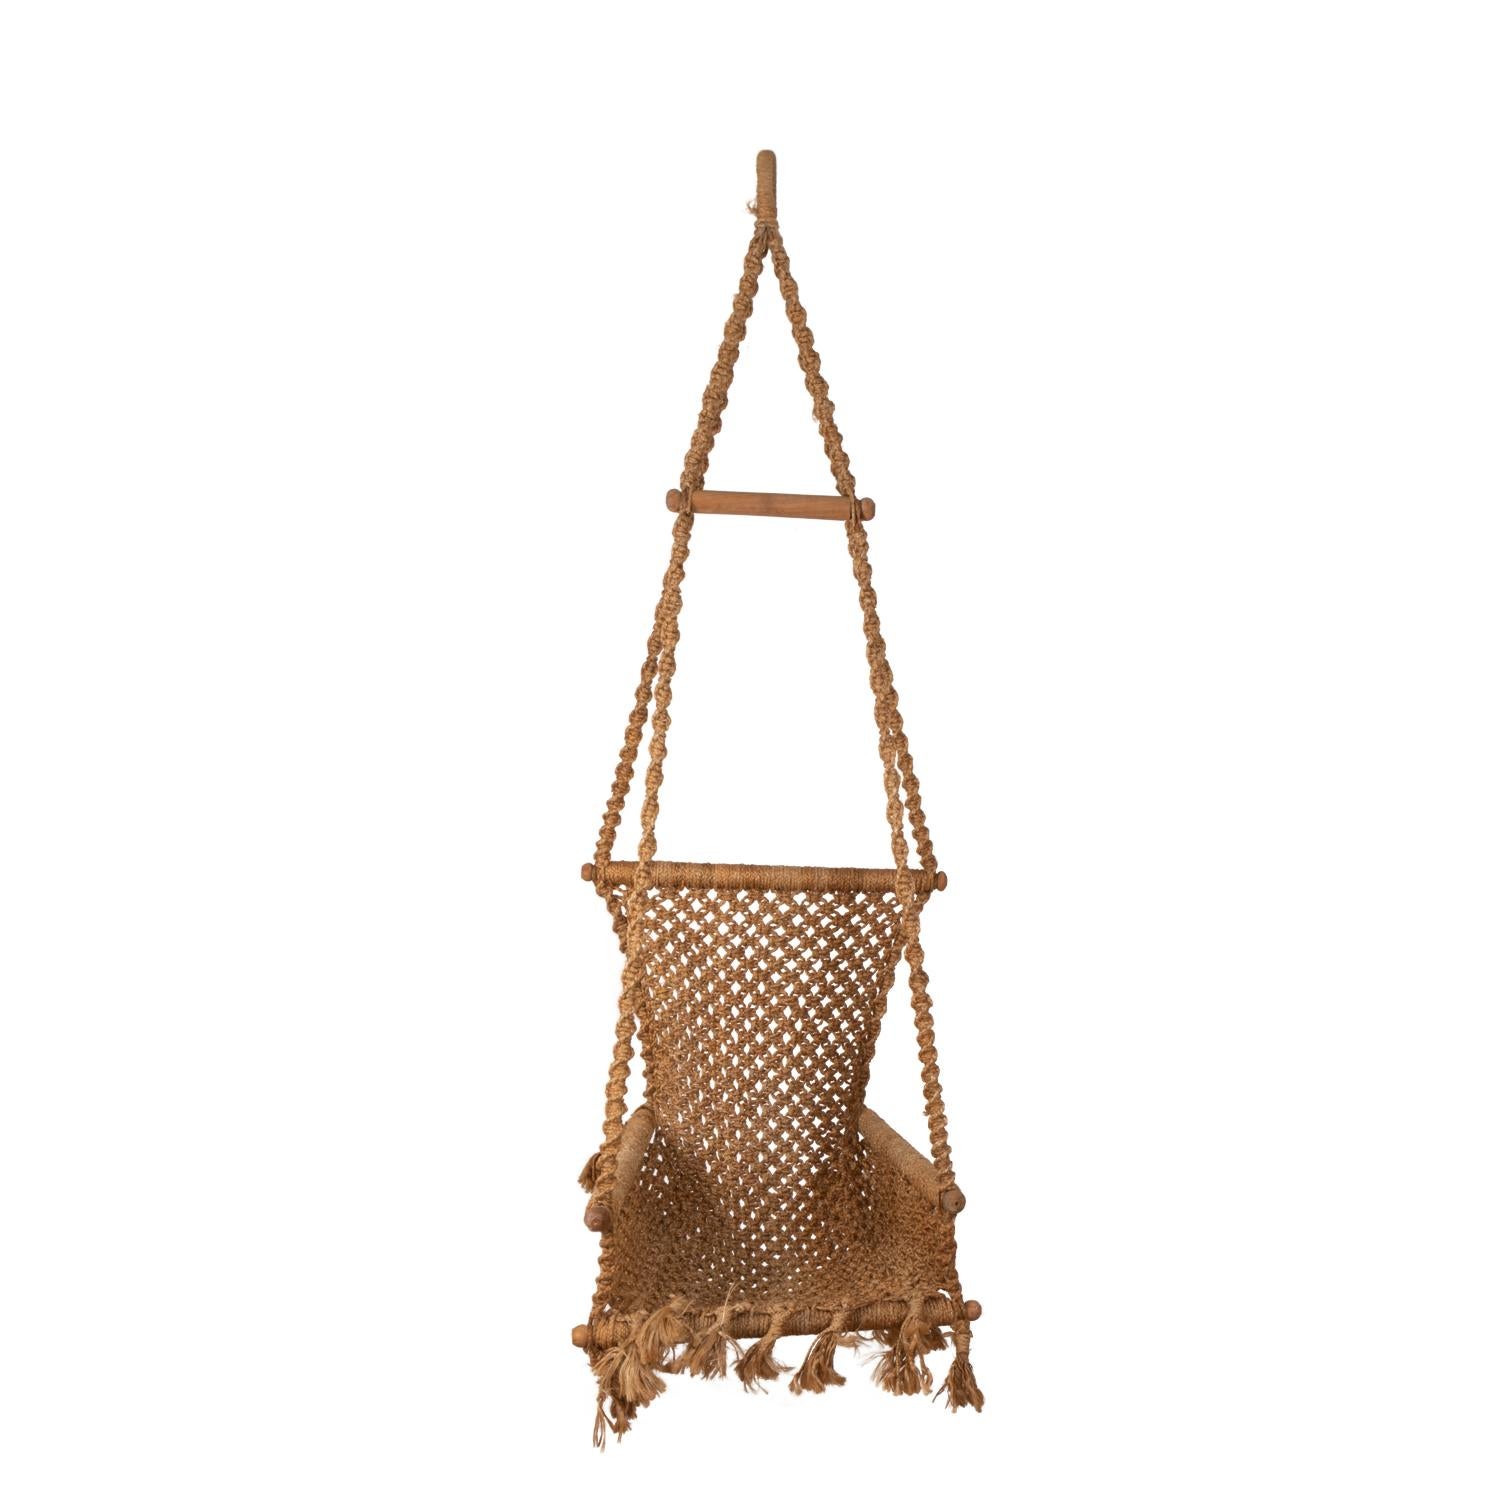 Hanging chair in braided rope and wood.

French work realized in the 1970s.